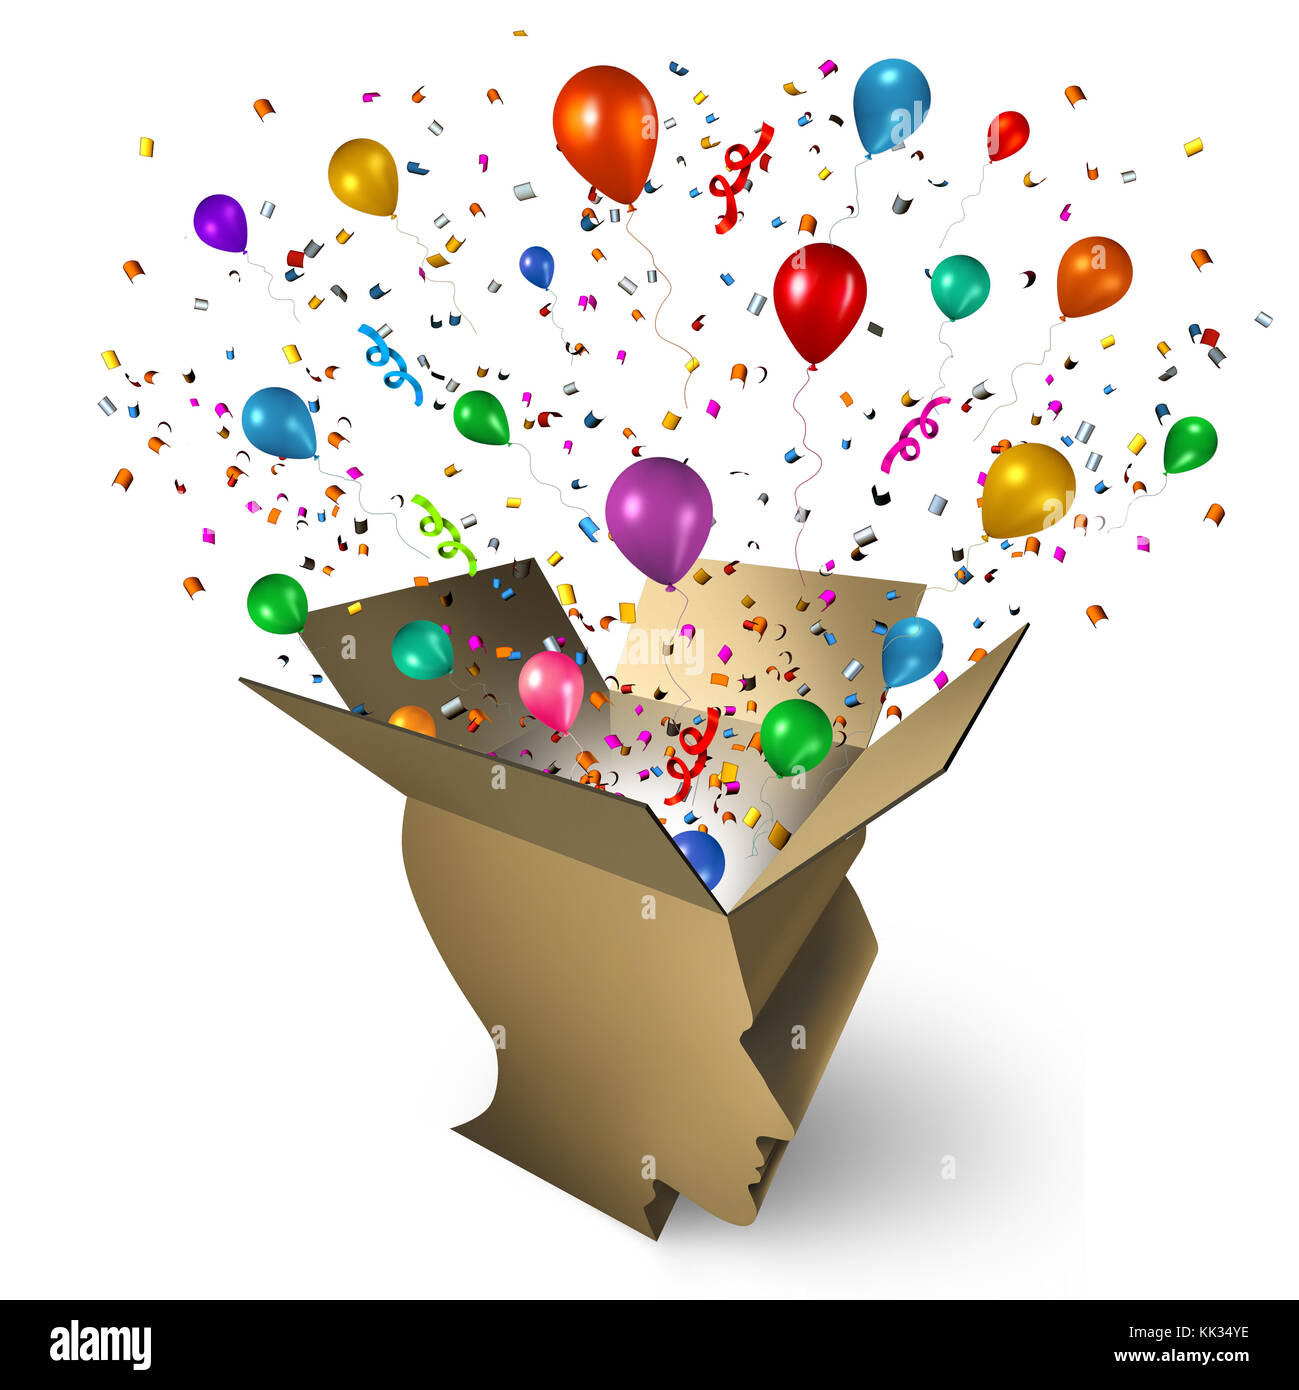 Prize winner and winning celebration with a box shaped as a human head with confetti and balloons exploding out as a celebration concept. Stock Photo